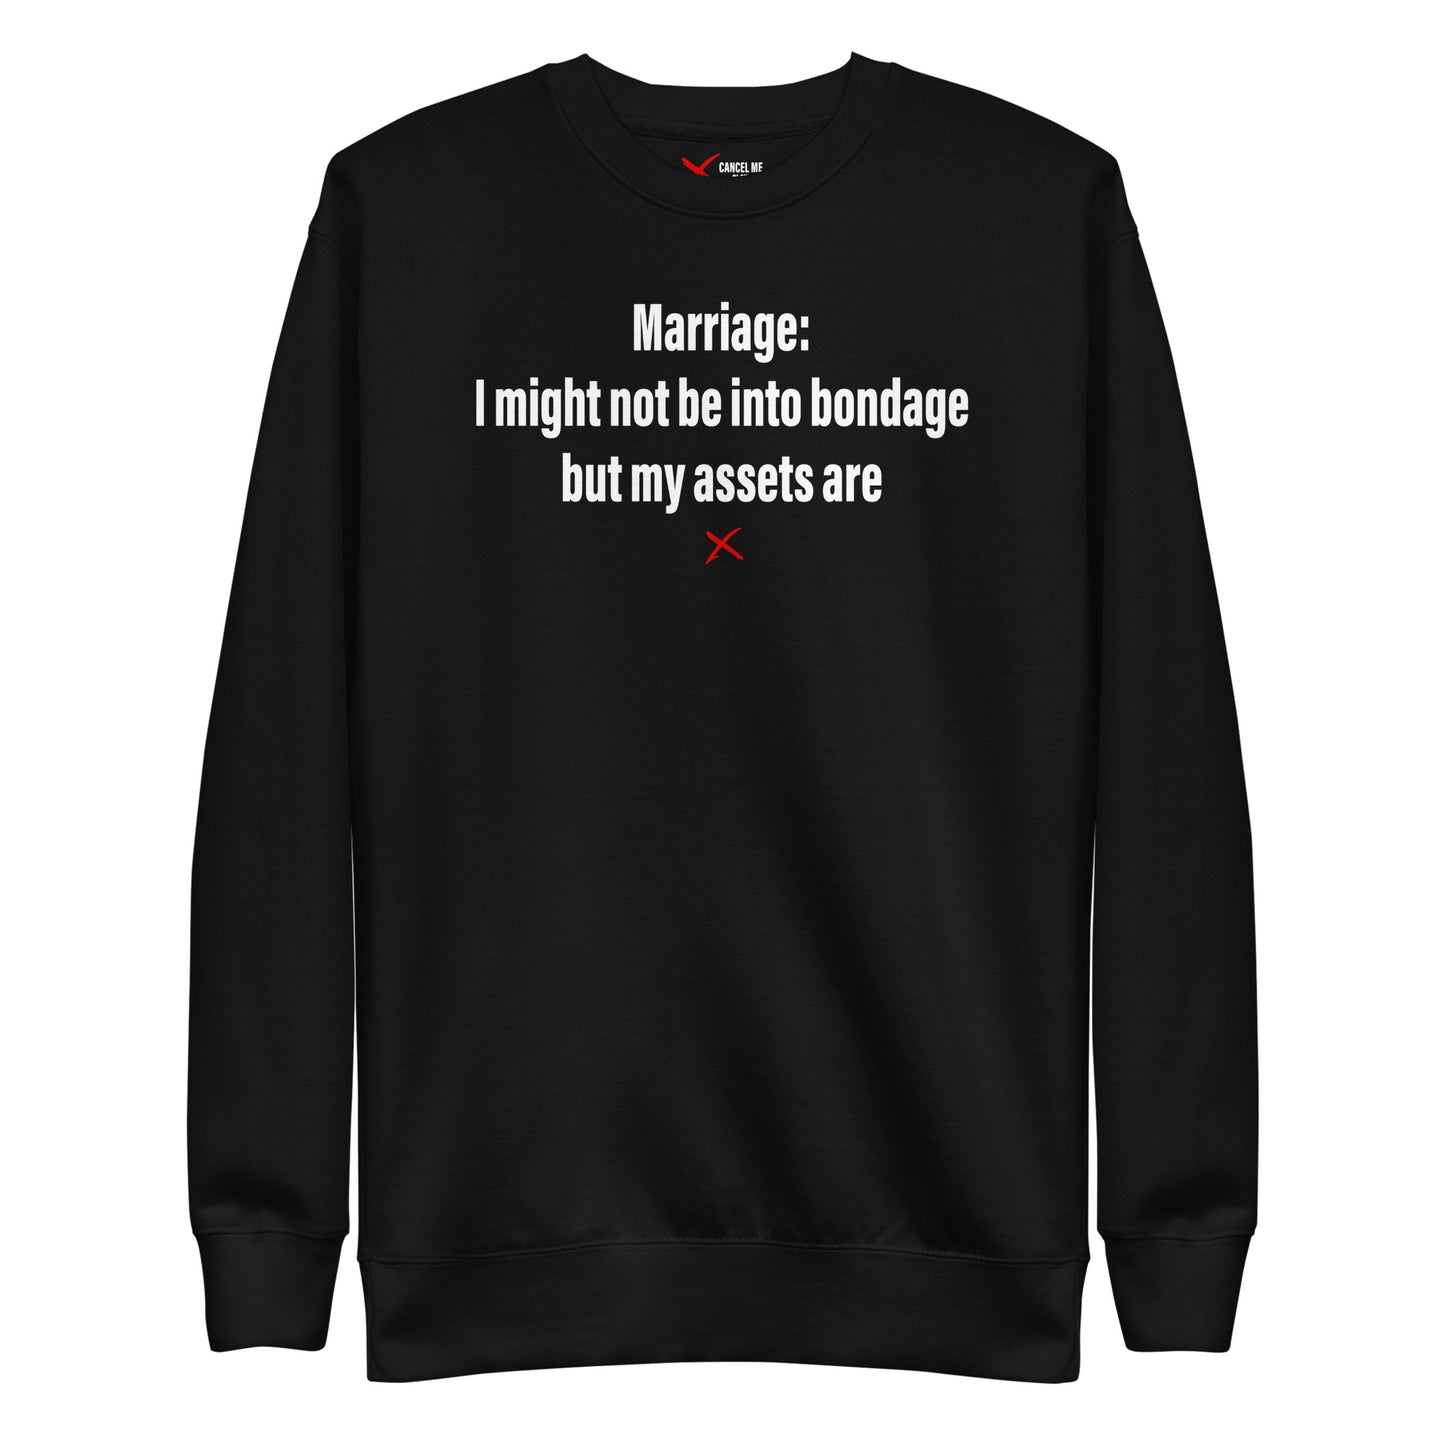 Marriage: I might not be into bondage but my assets are - Sweatshirt